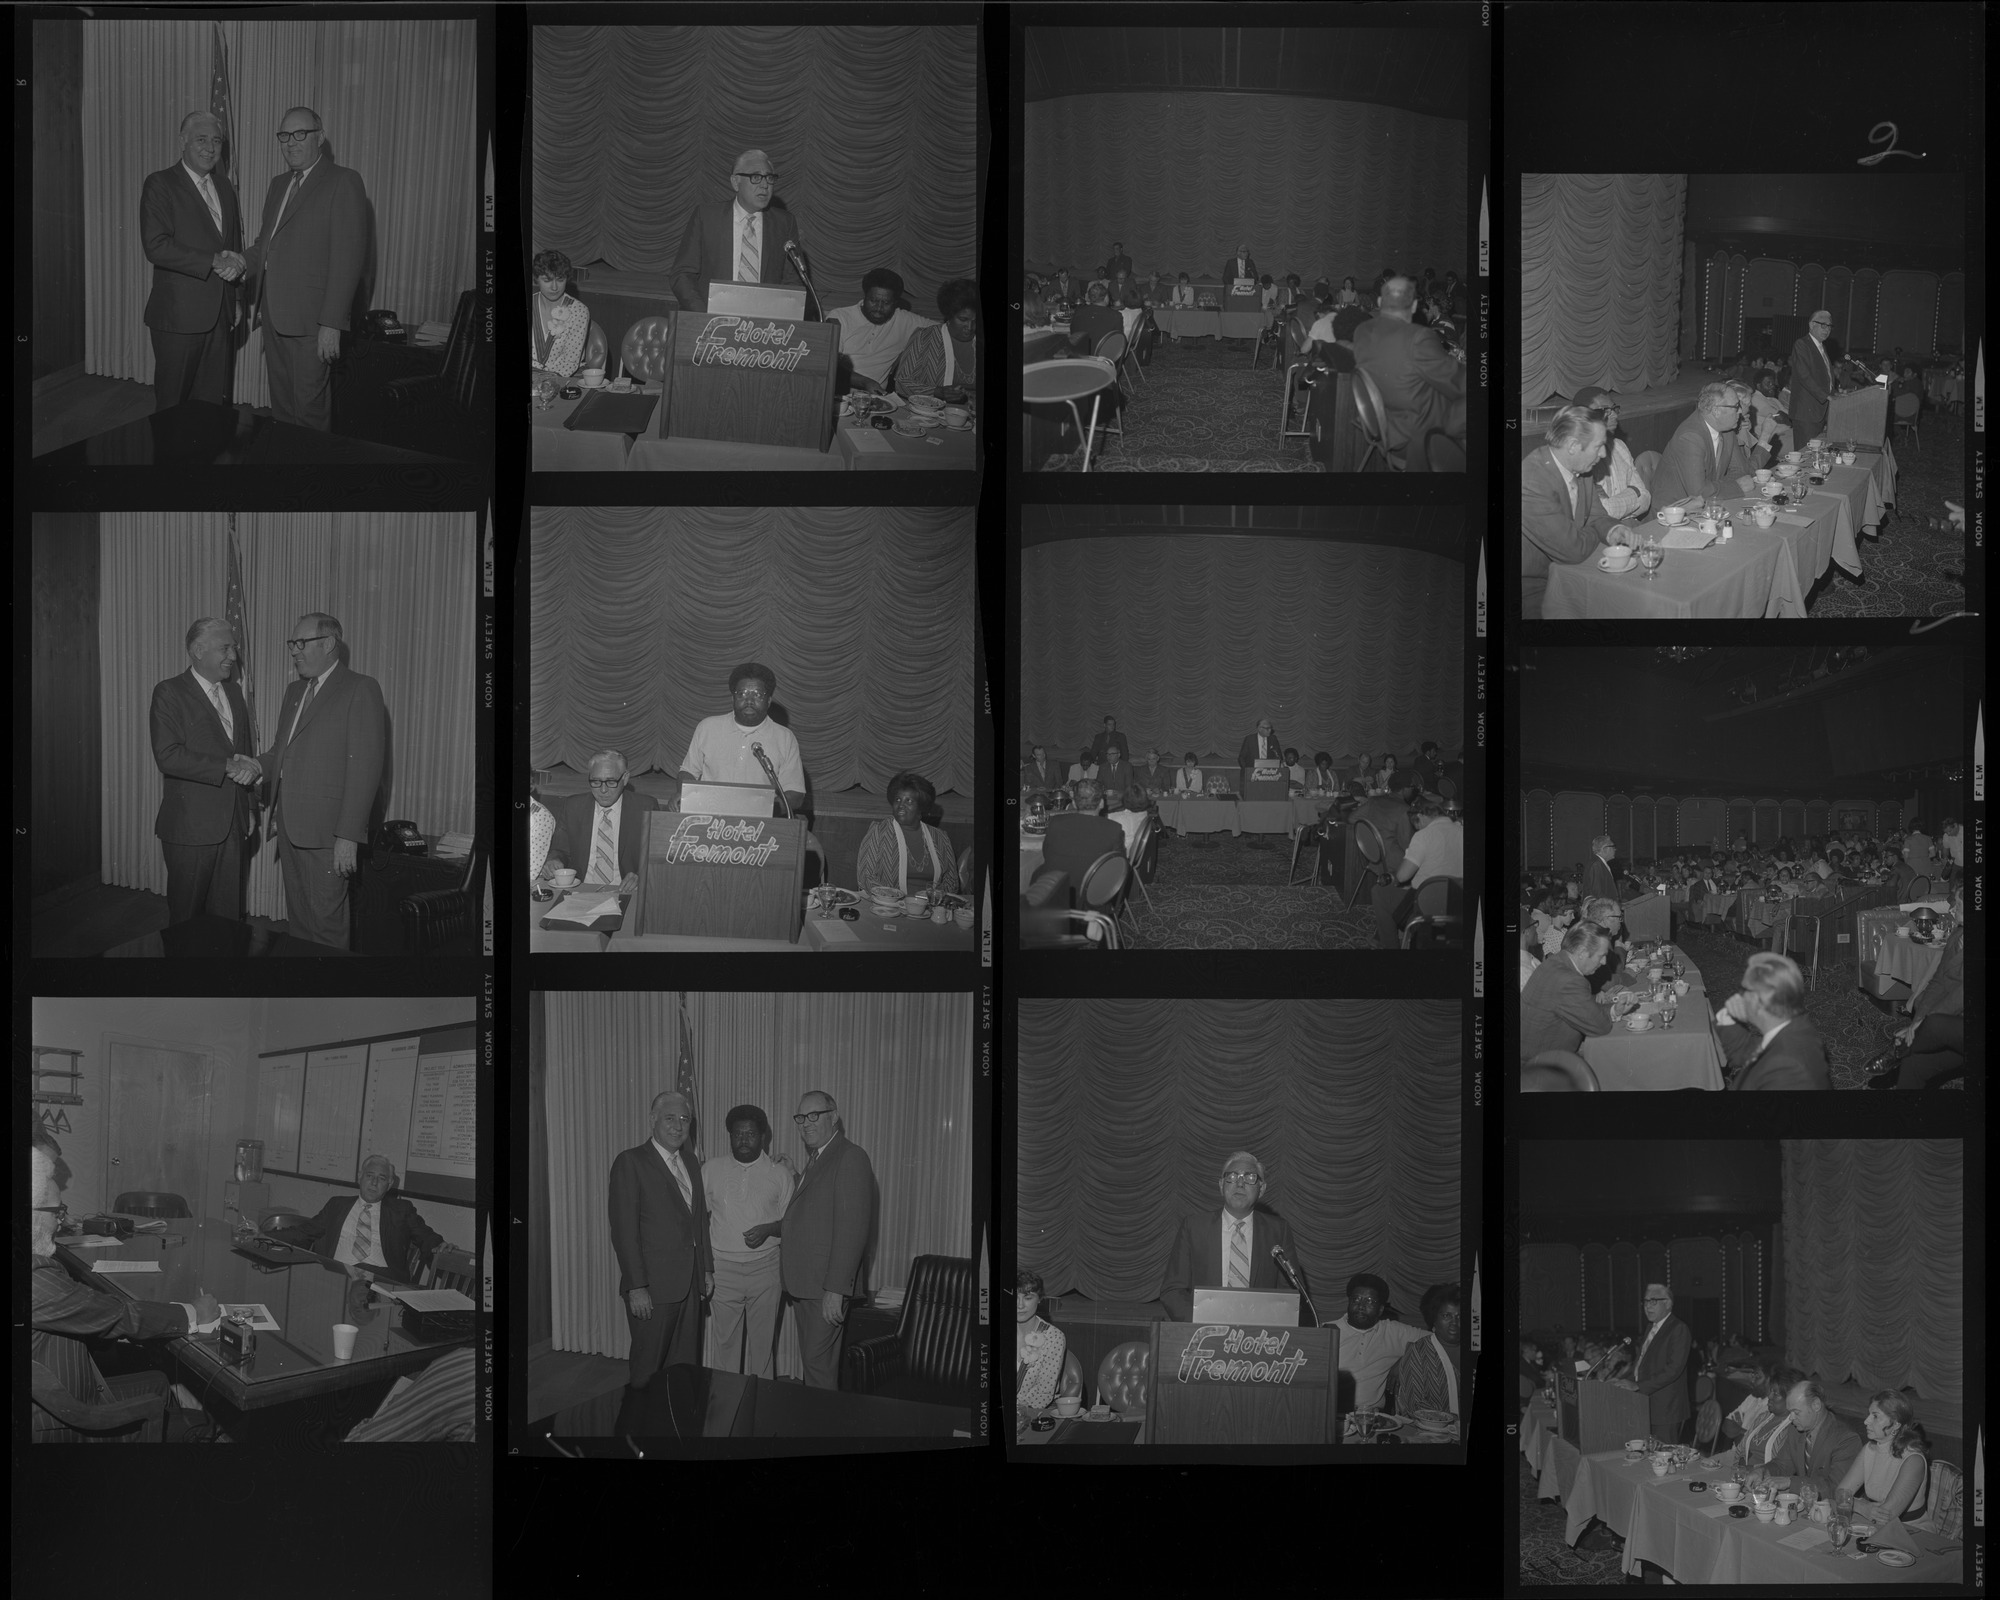 Set of negatives by Clinton Wright including  Mr. Bett's visit to Las Vegas, Jo Mackey's Negro History program, and Earl Swift's barber shop, 1971, page 1